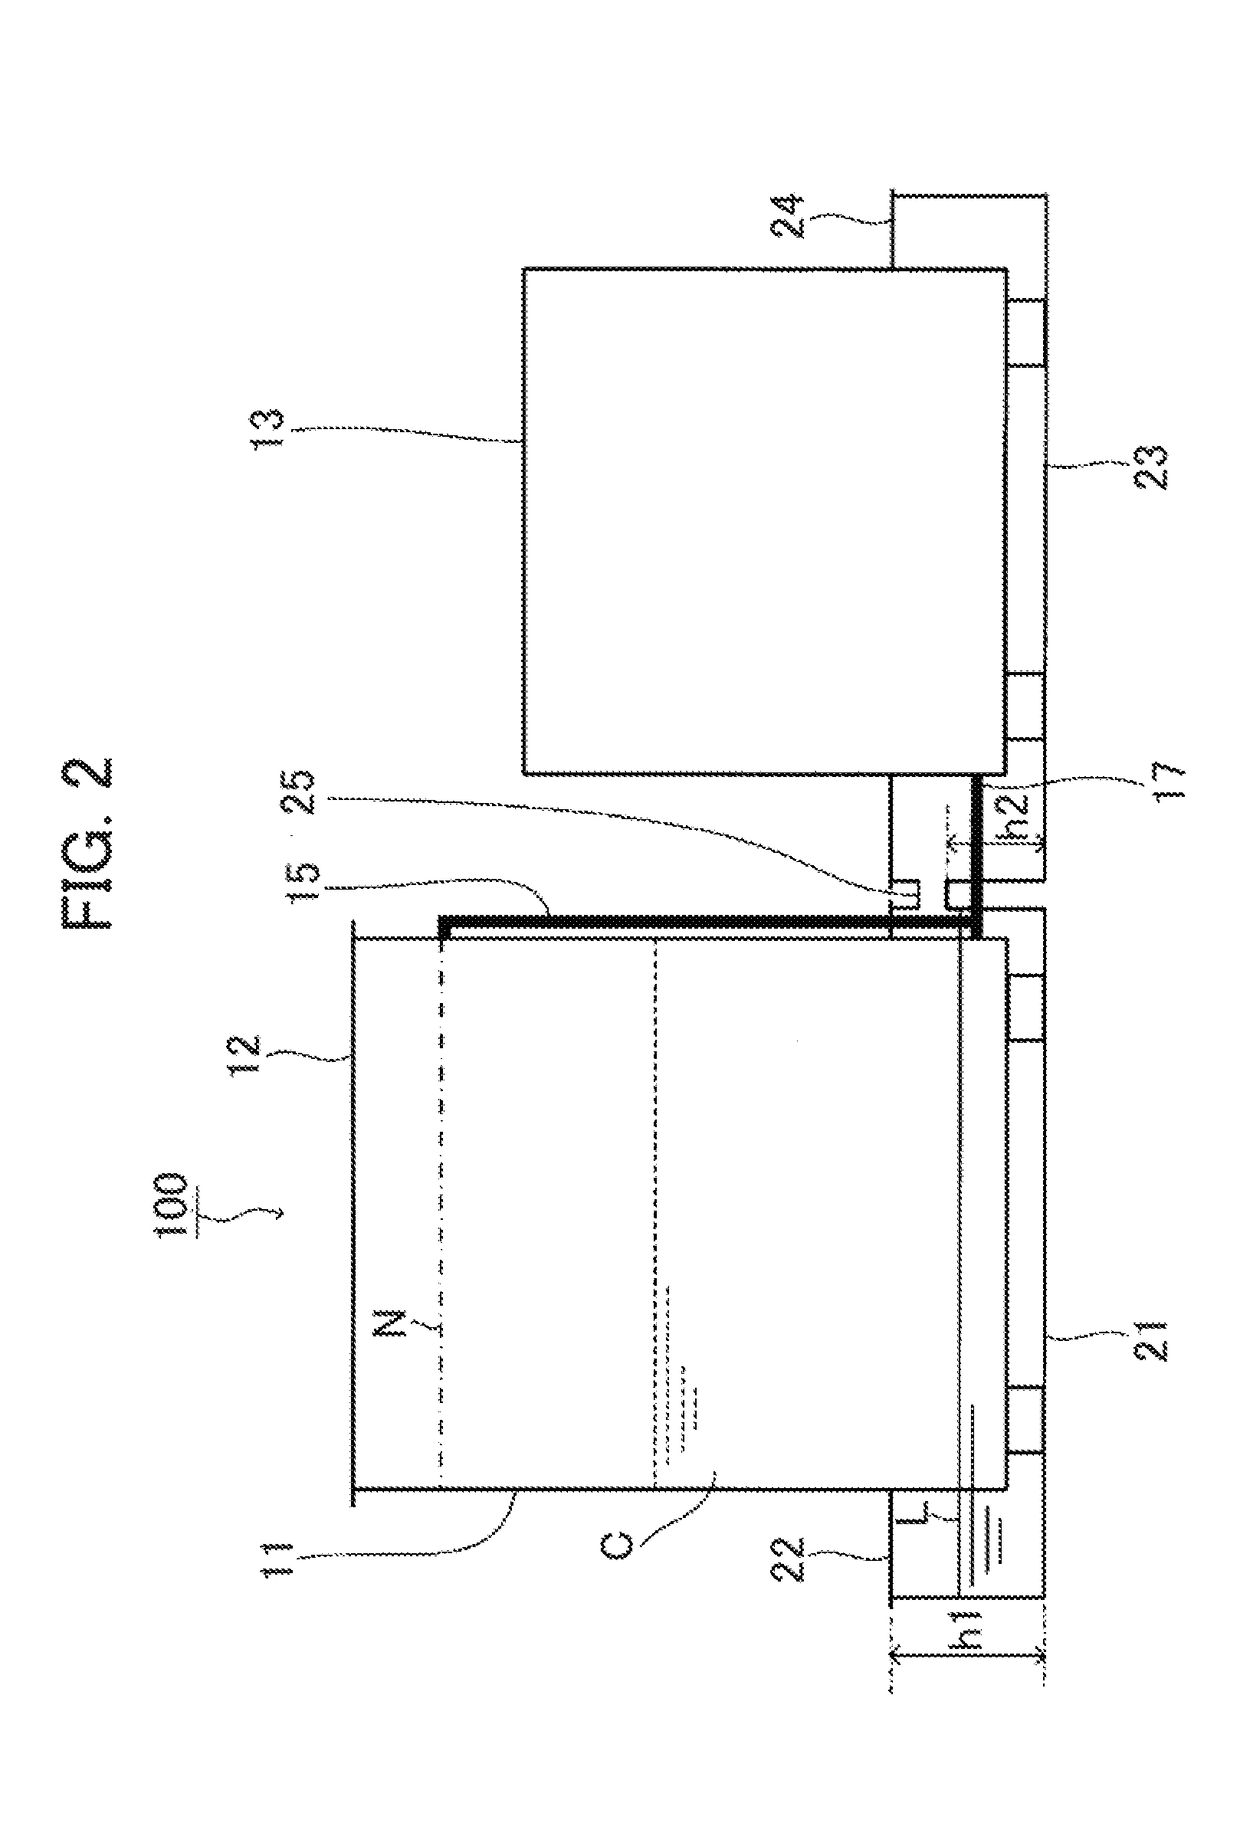 Electronic device cooling system